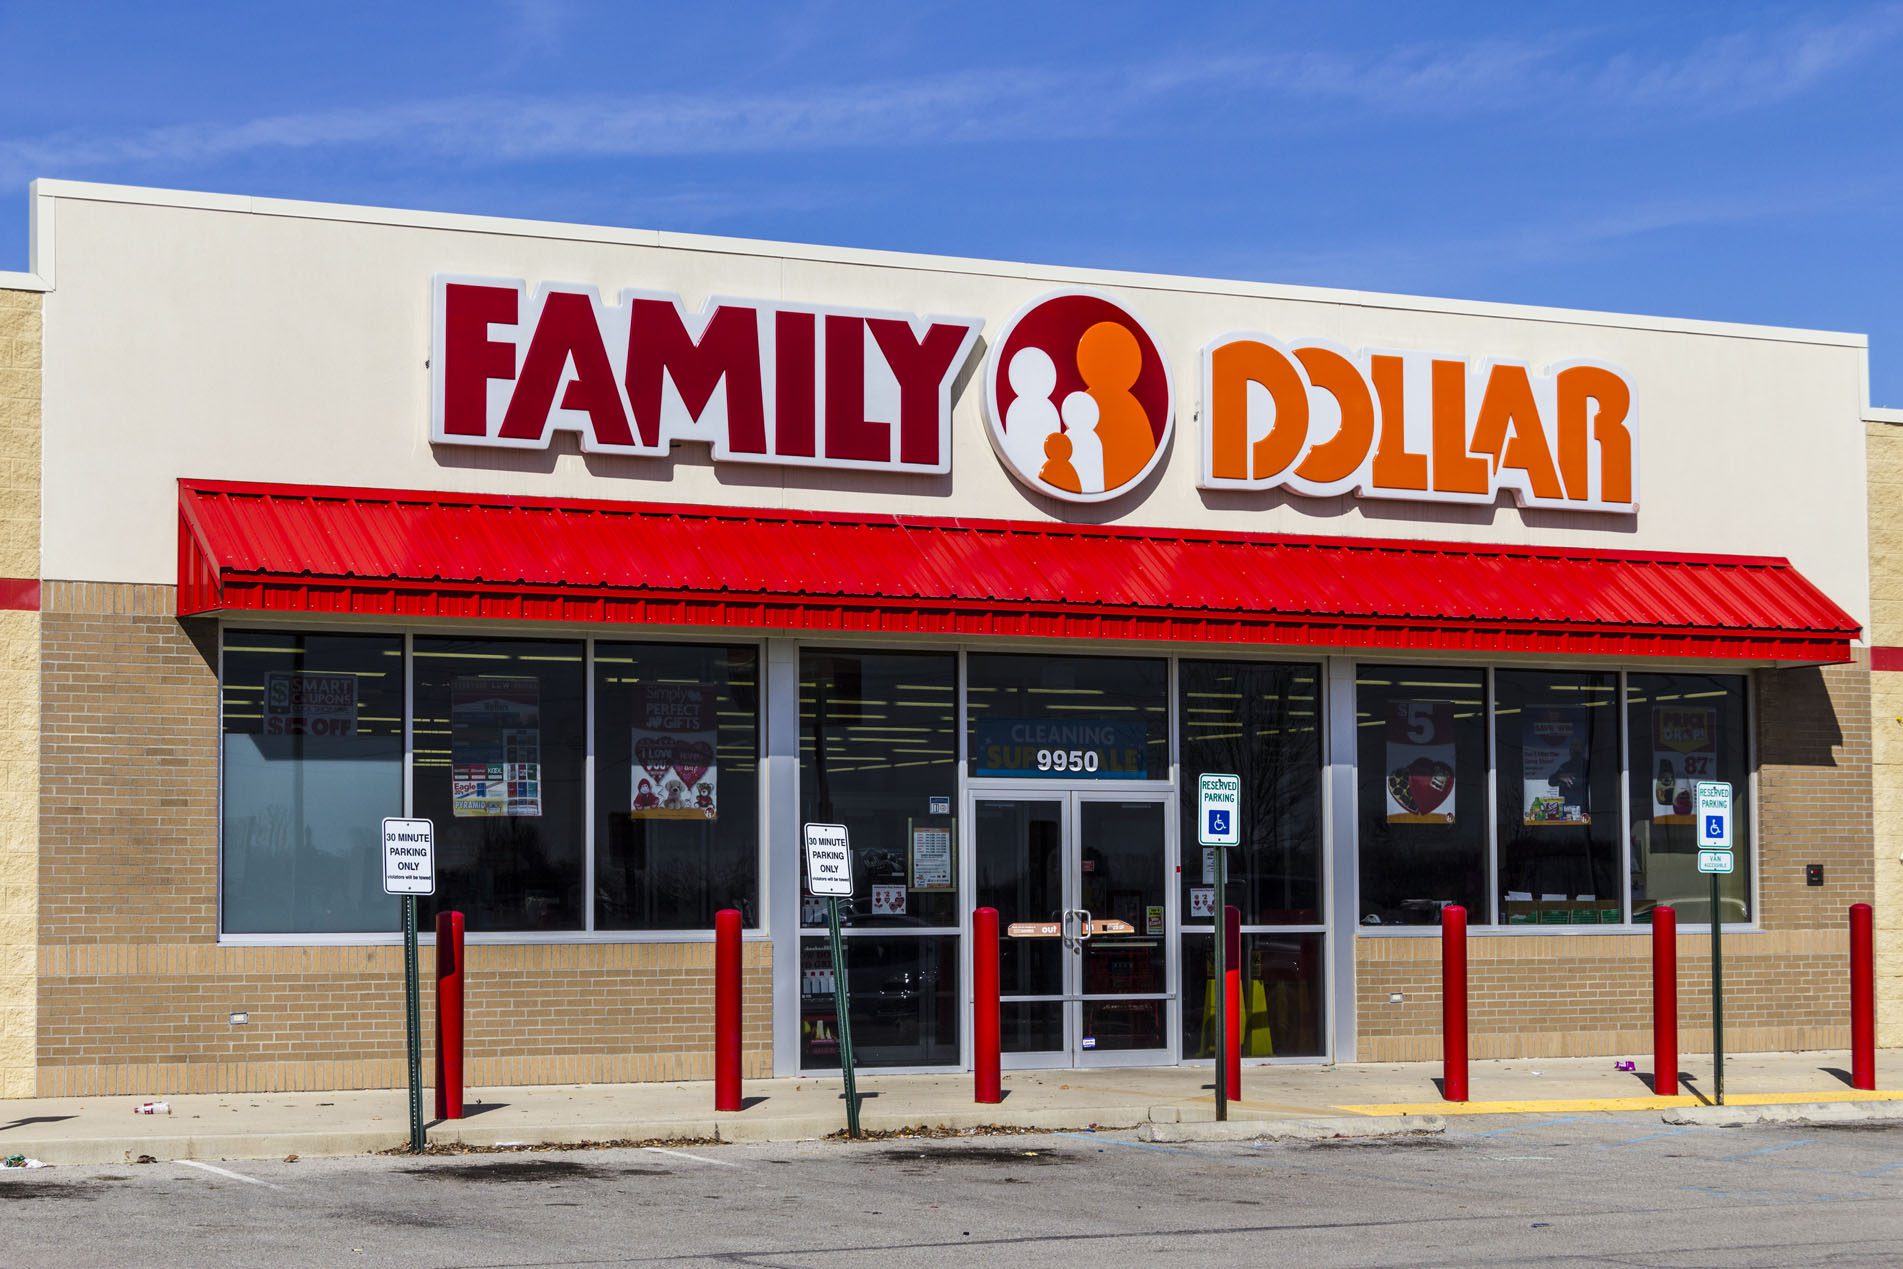 Family Dollar Wertz Real Estate Investment Services